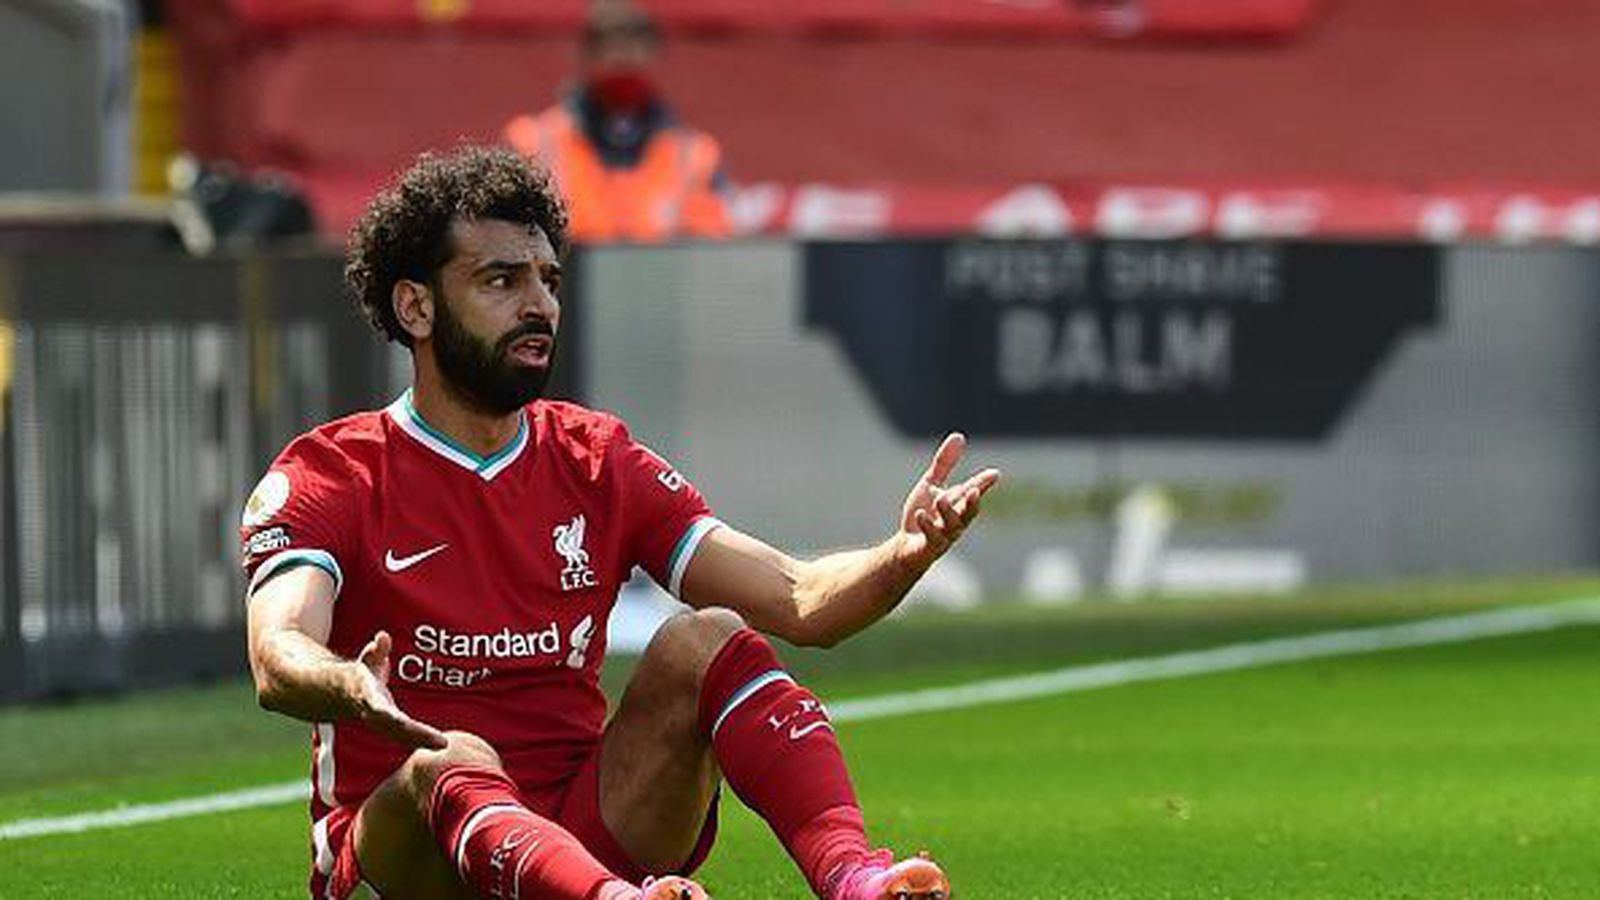 PSG Transfer News | PSG could sign Liverpool forward Mohamed Salah if Kylian Mbappe decides to leave the clubs